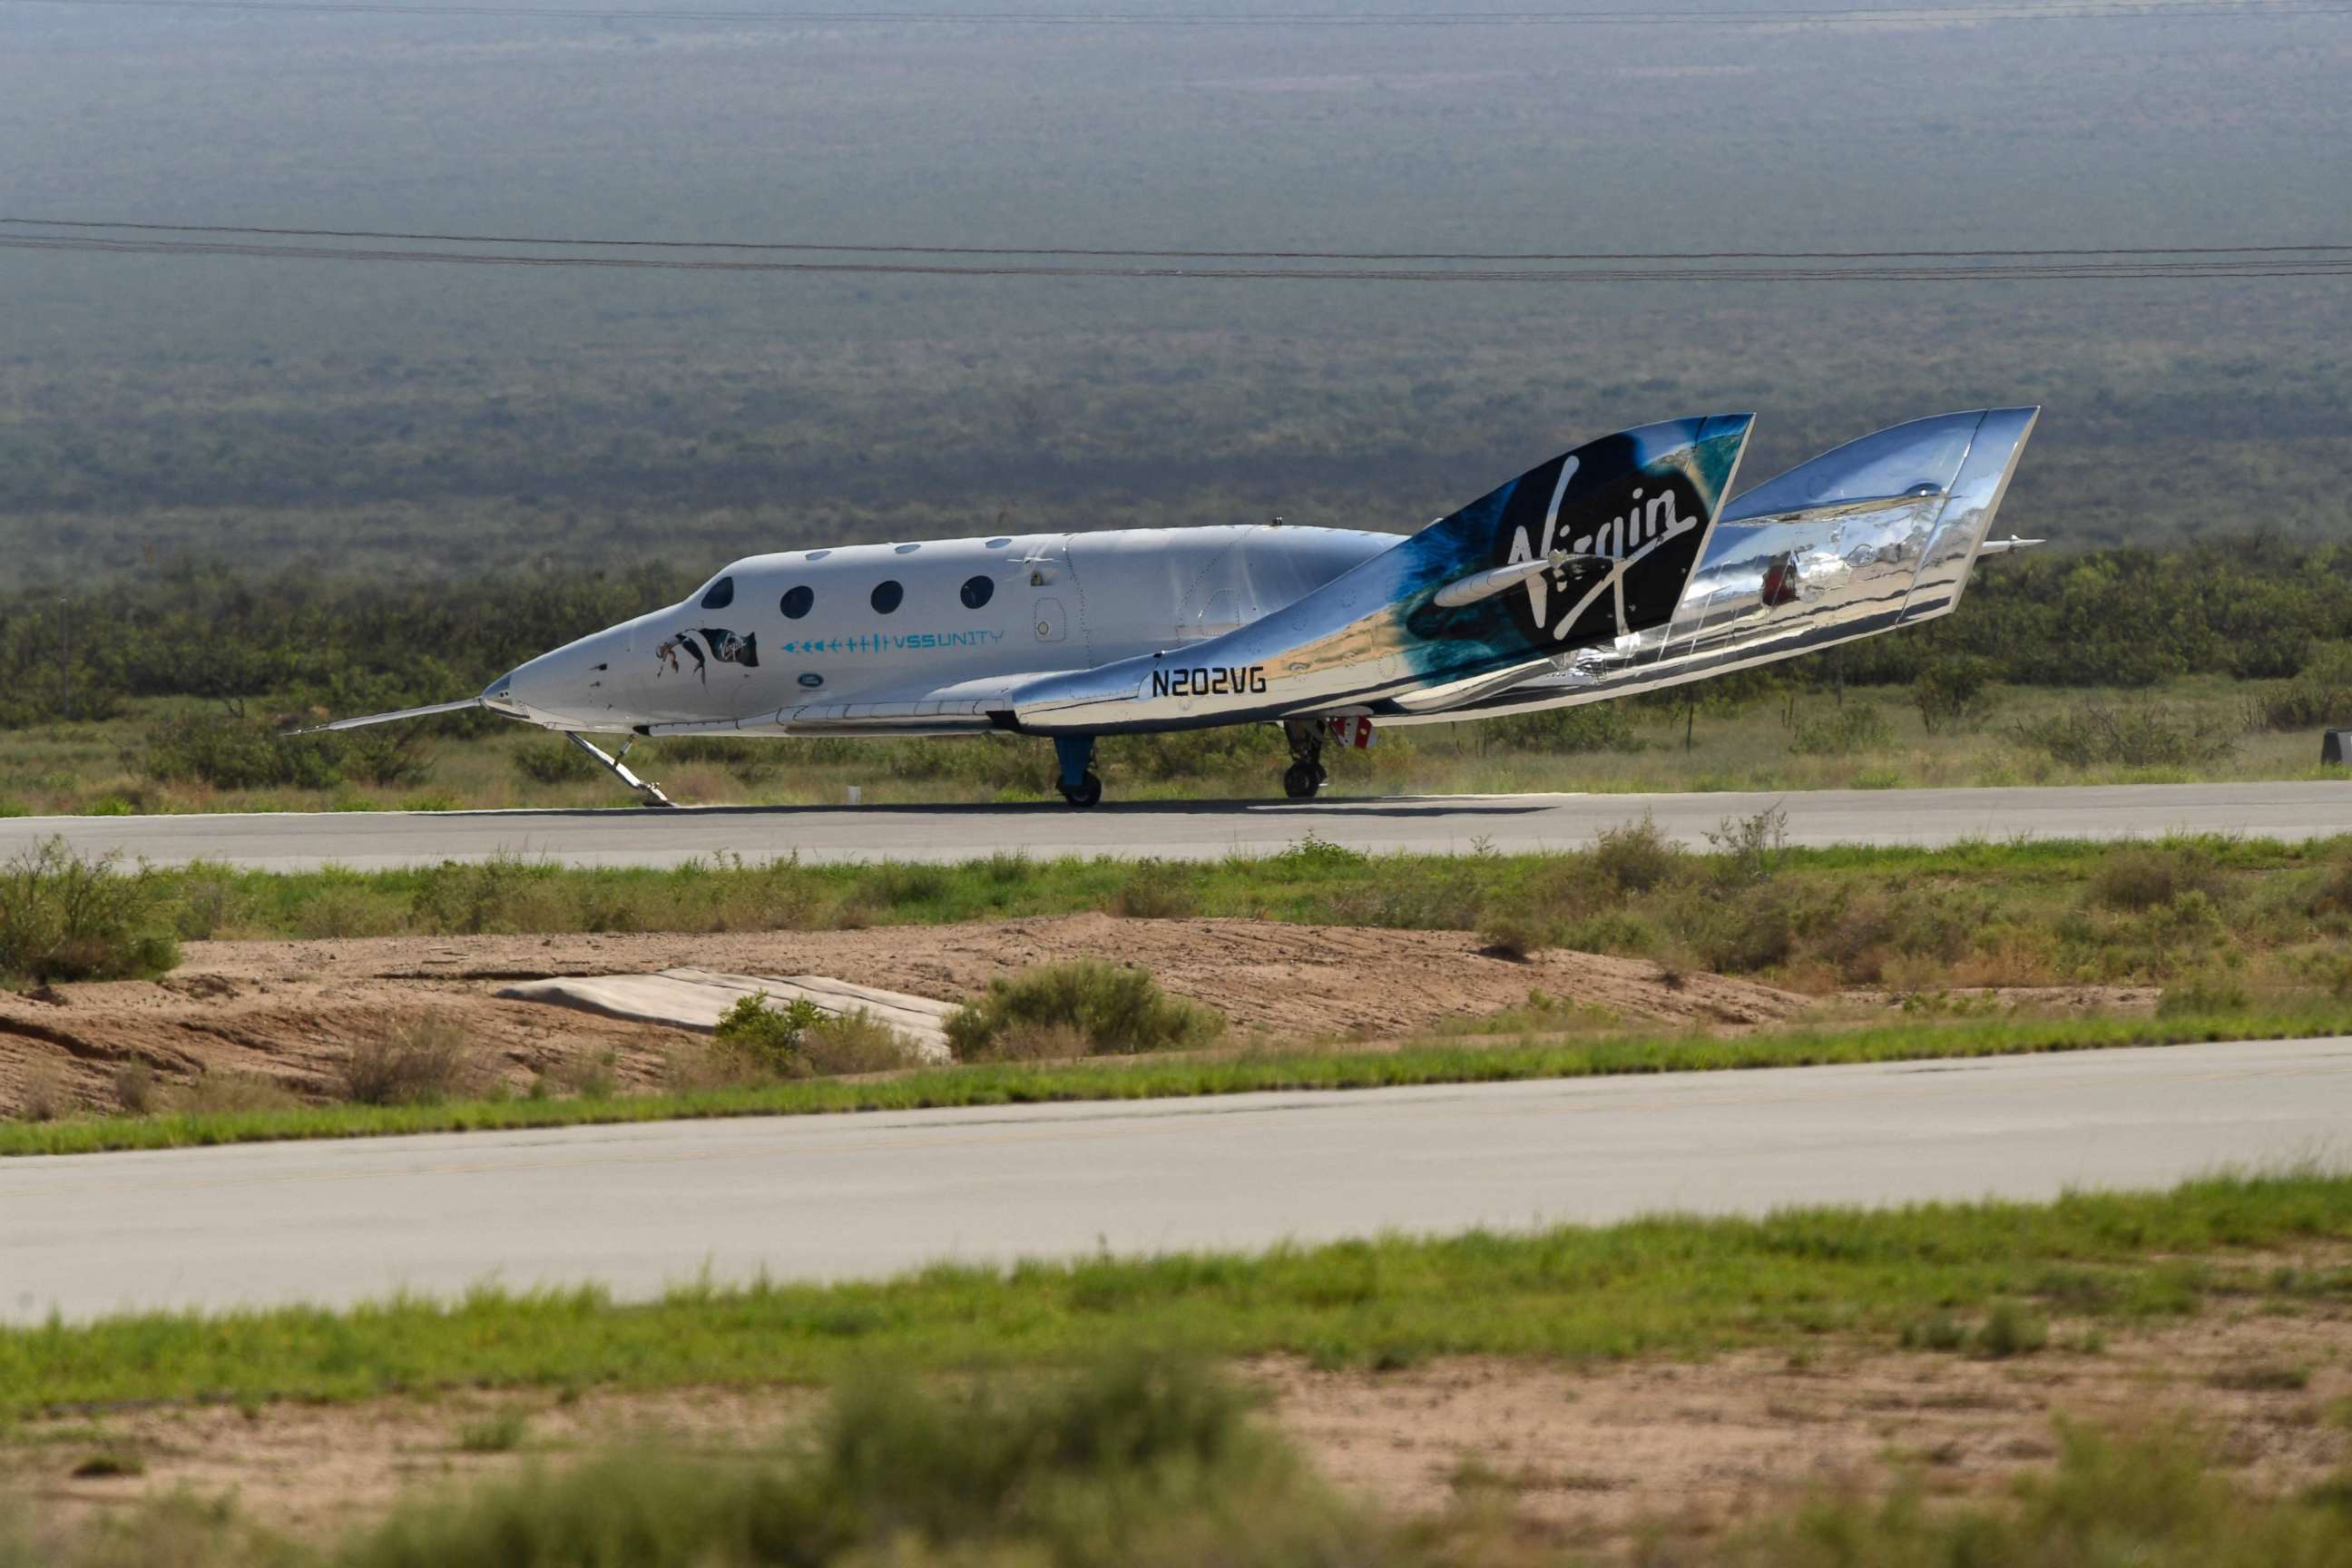 PHOTO: The Virgin Galactic SpaceShipTwo space plane Unity returns to earth after the mothership separated at Spaceport America, near Truth and Consequences, New Mexico on July 11, 2021.